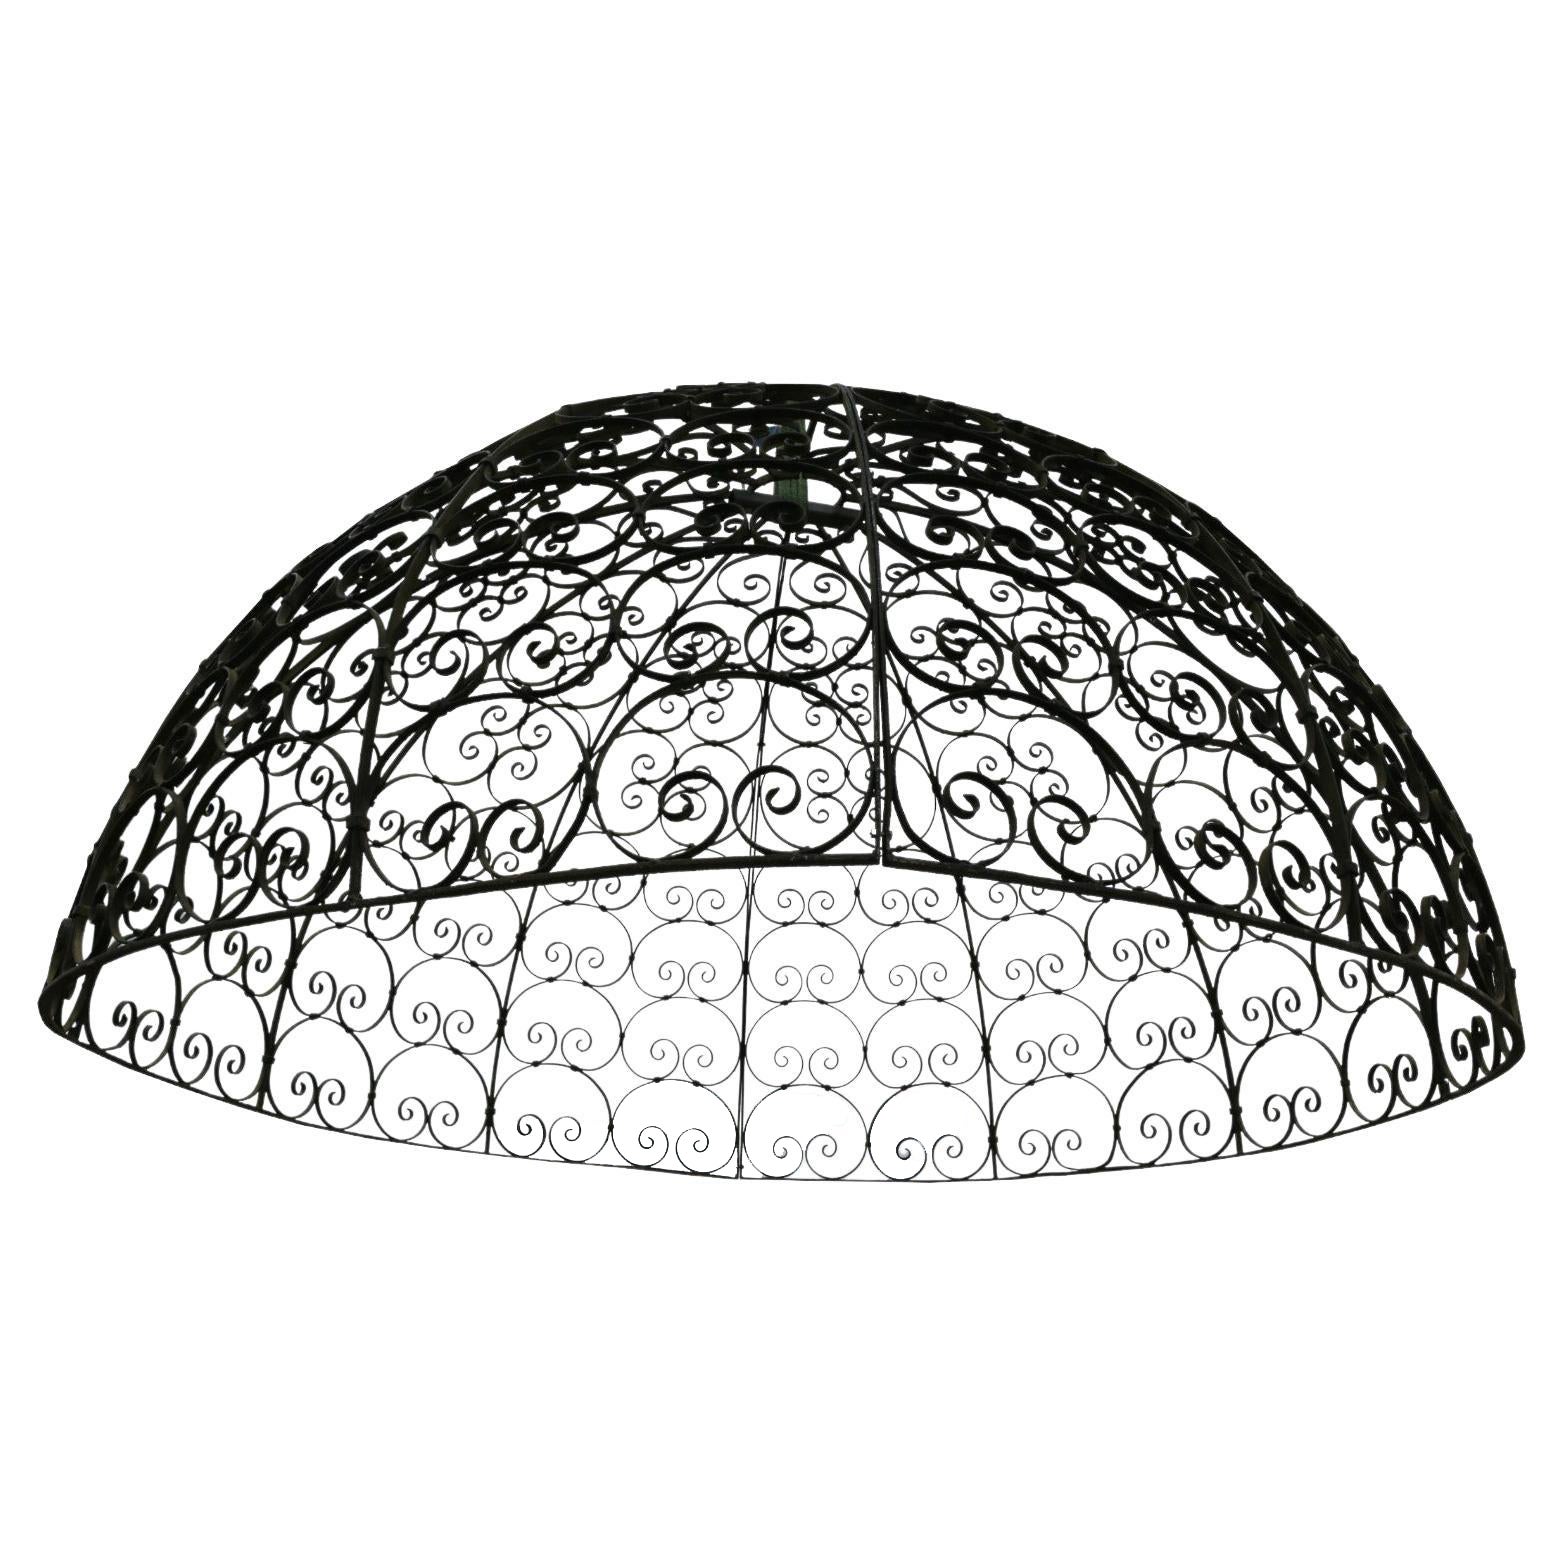 Wrought Iron Domed Roof